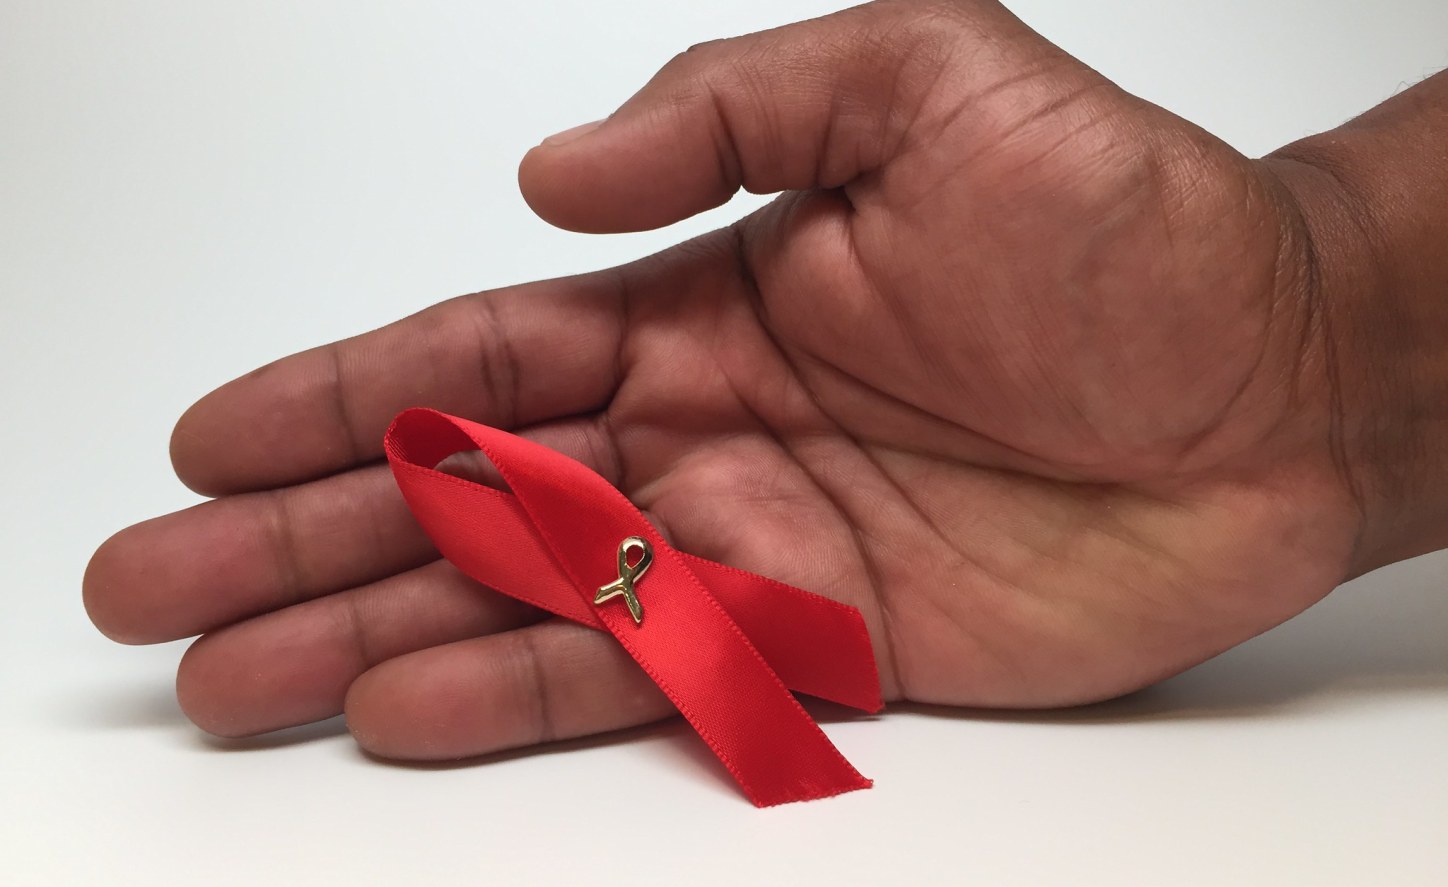 African leaders commit to end Aids among children by 2030